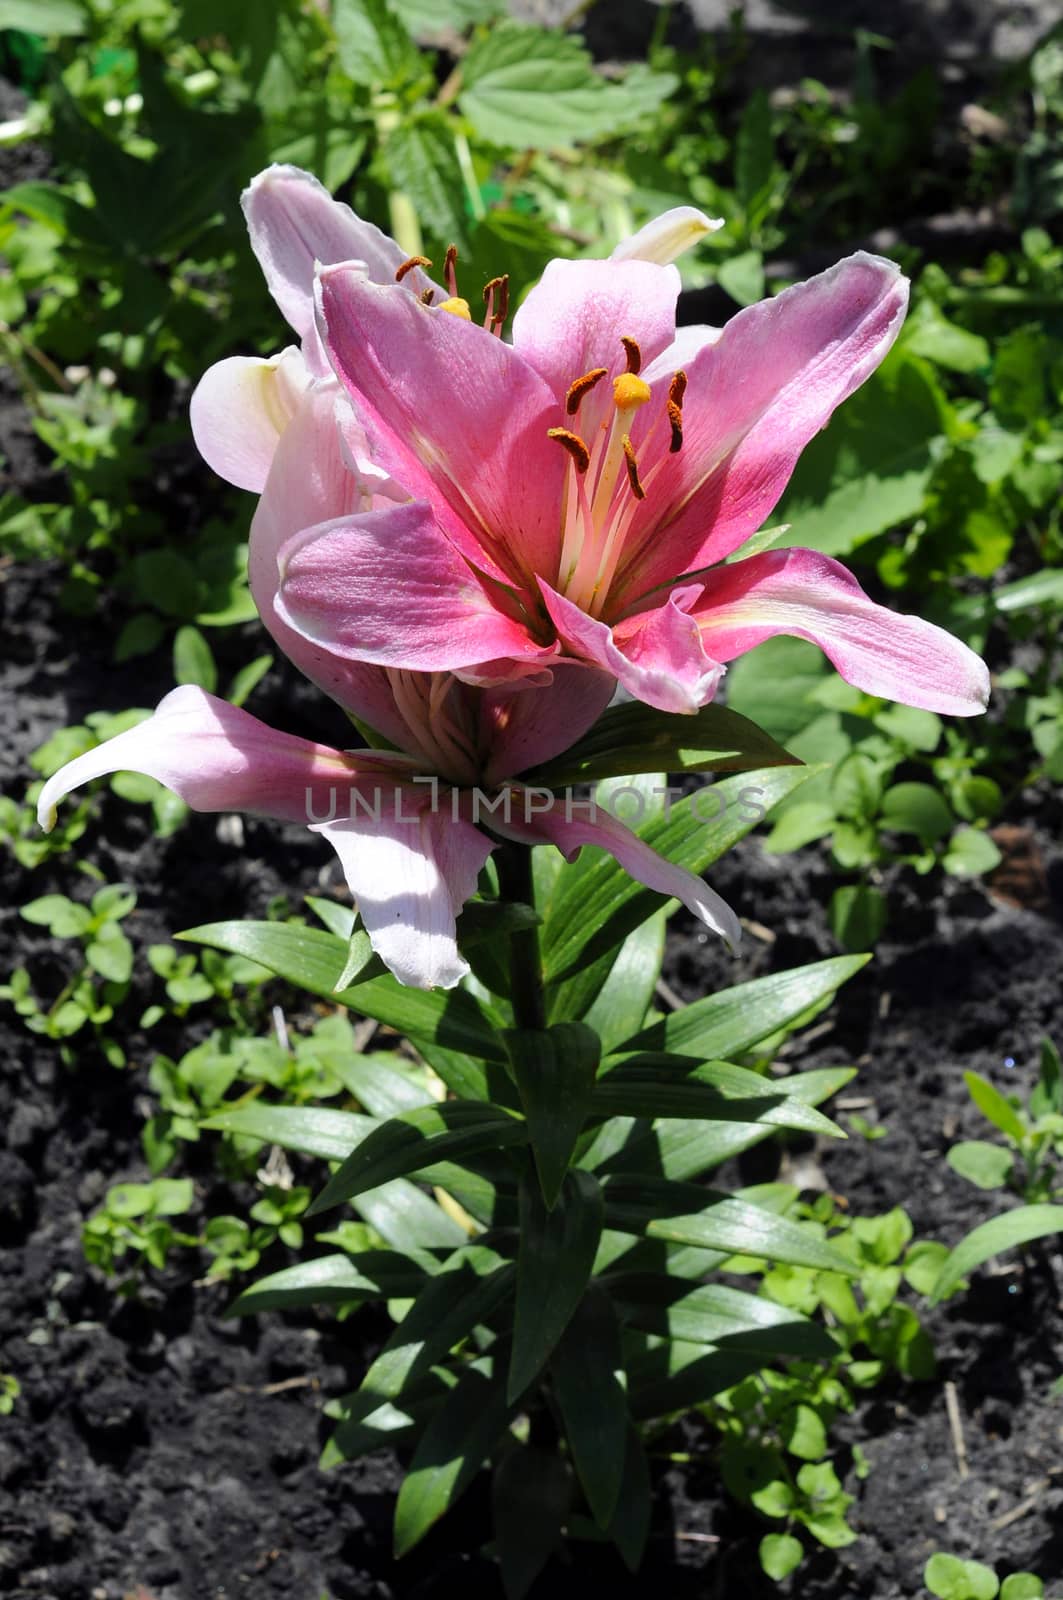 Gentle flowers of a pink lily in a garden